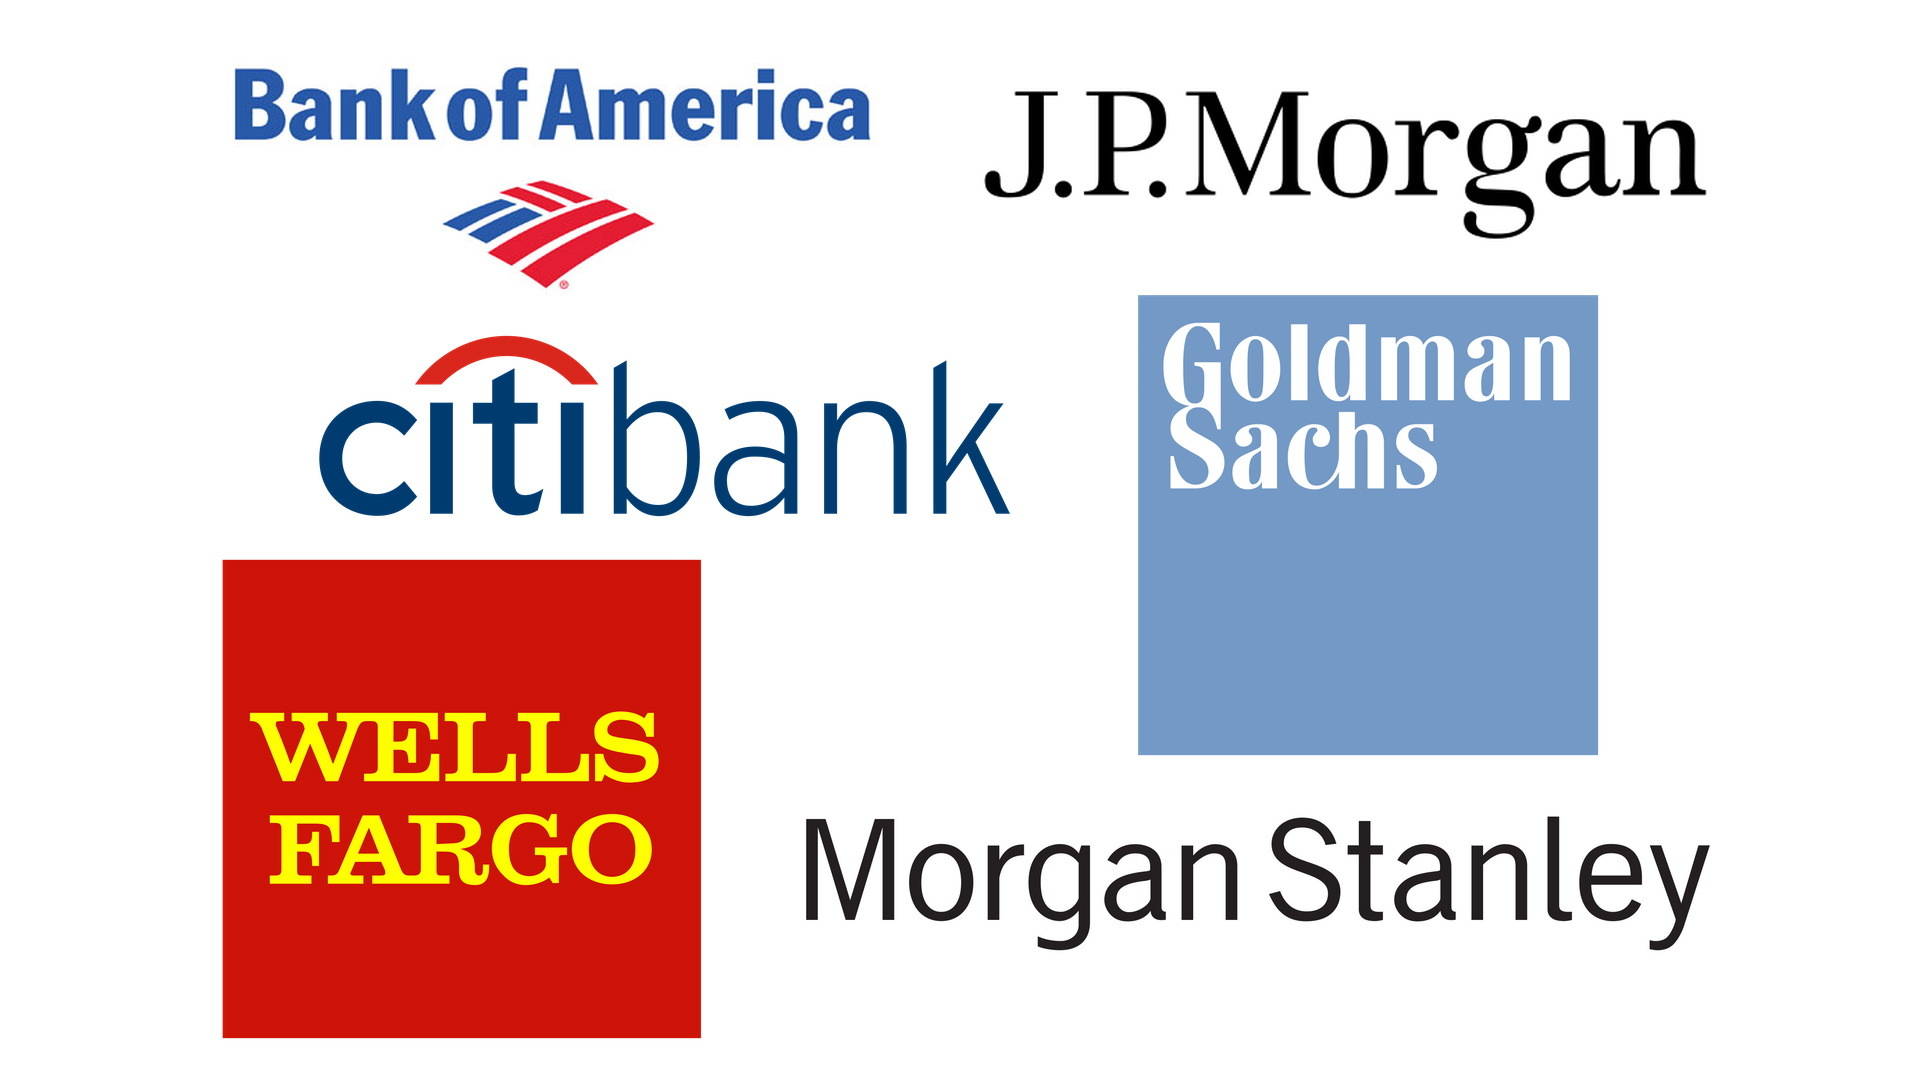 Popular Bank Logos And The Meaning Behind The Logo Designs